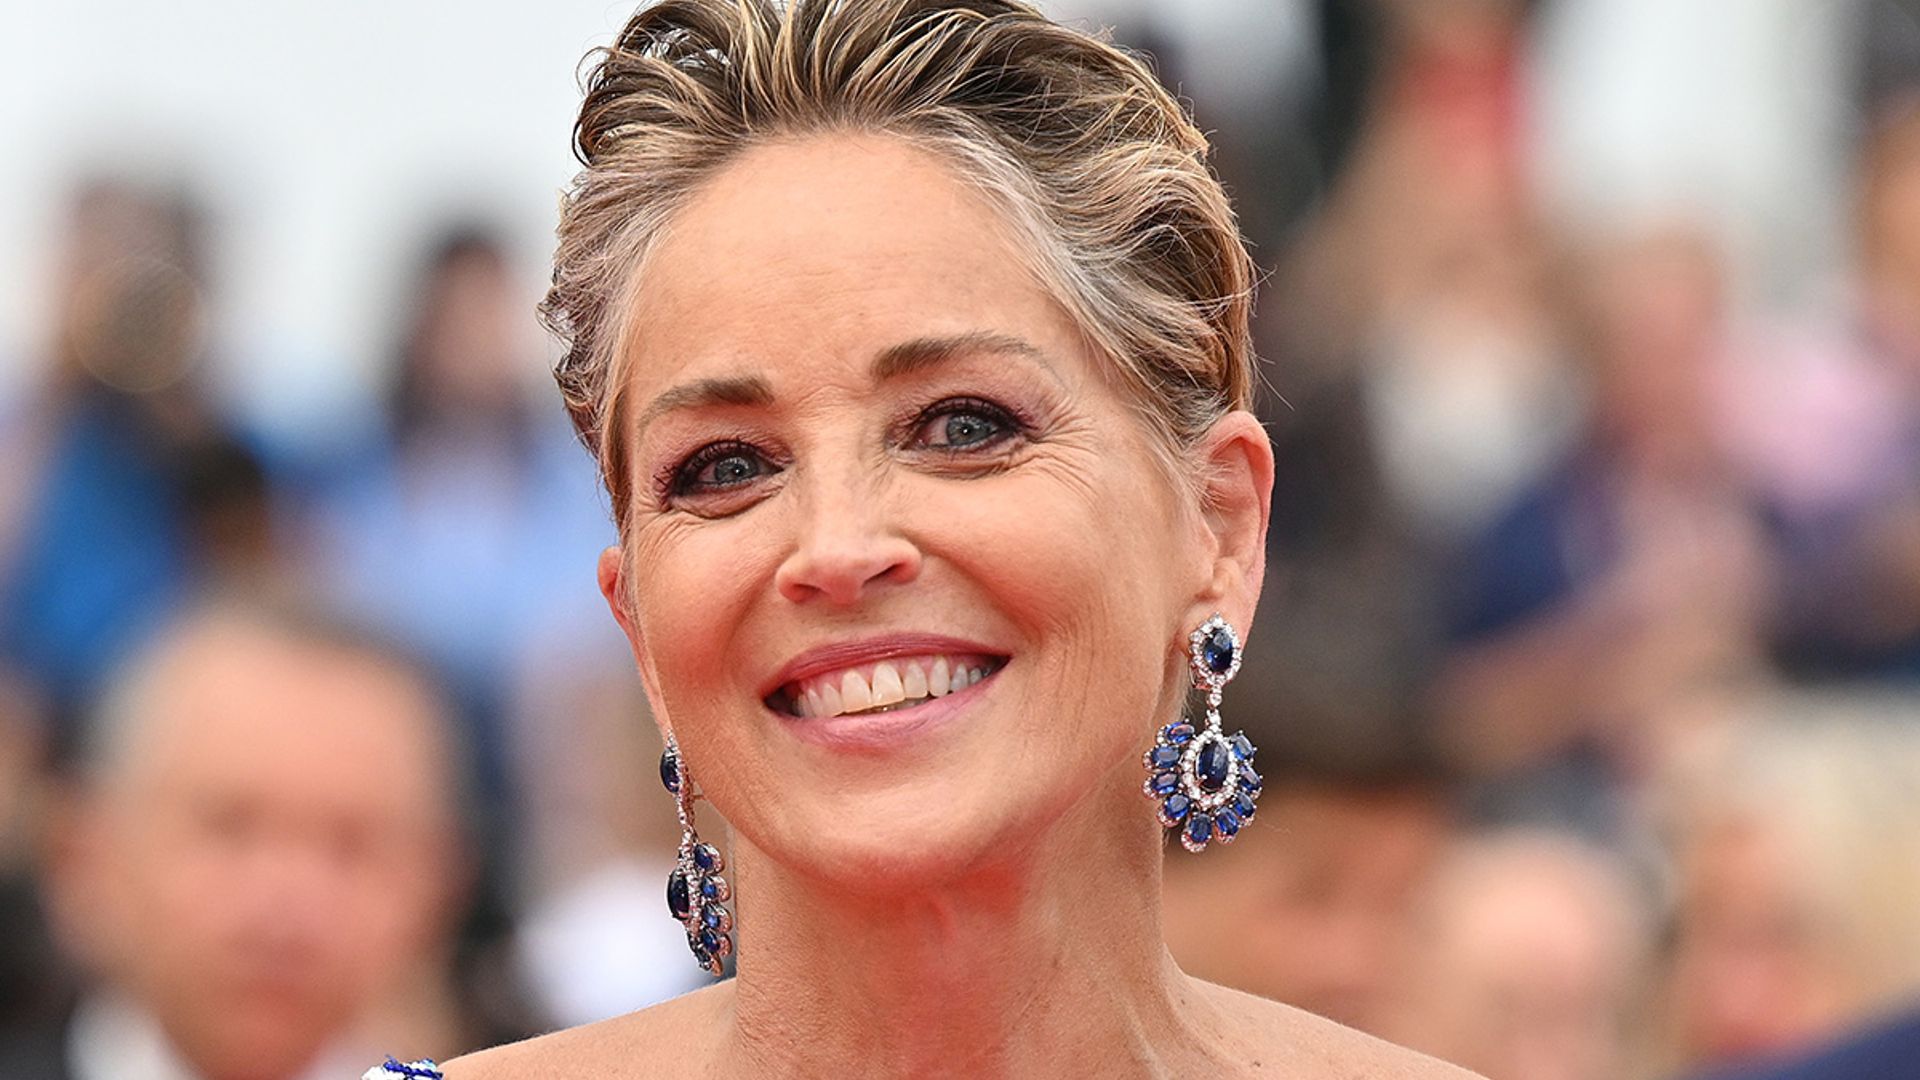 Sharon Stone shares intimate glimpse into her bedroom with details nobody was expecting